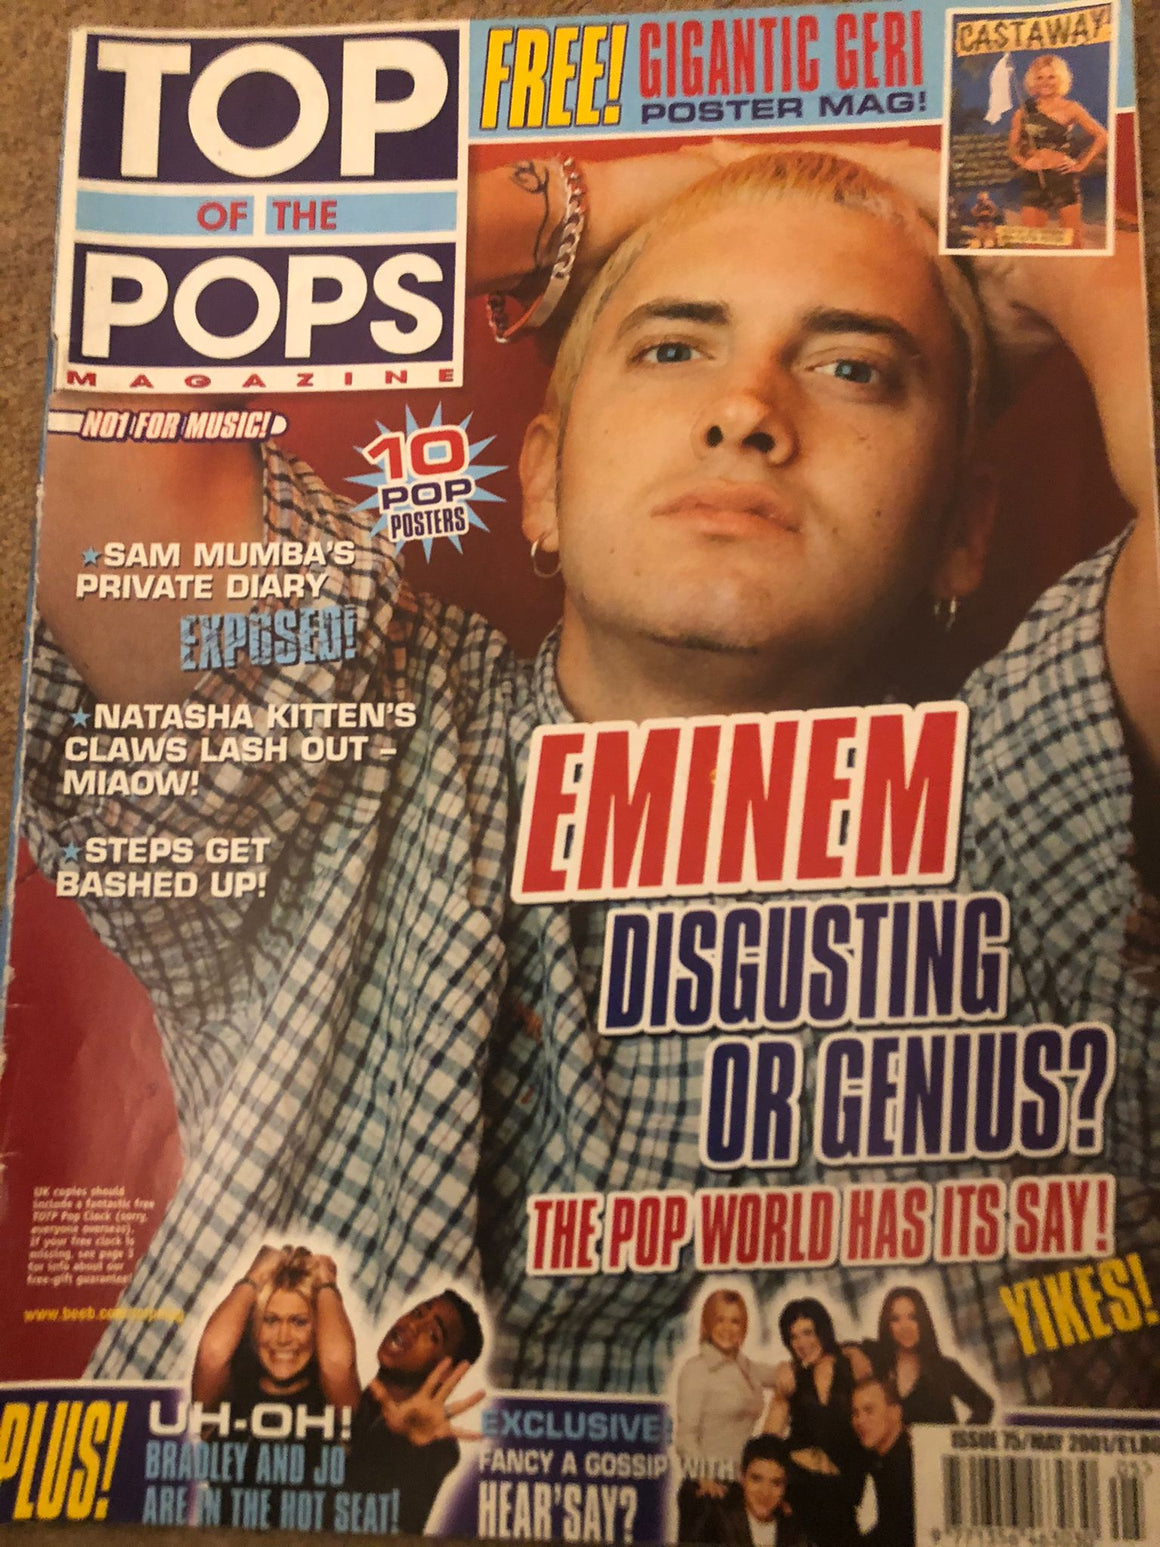 TOP OF THE POPS Magazine #75 EMINEM COVER